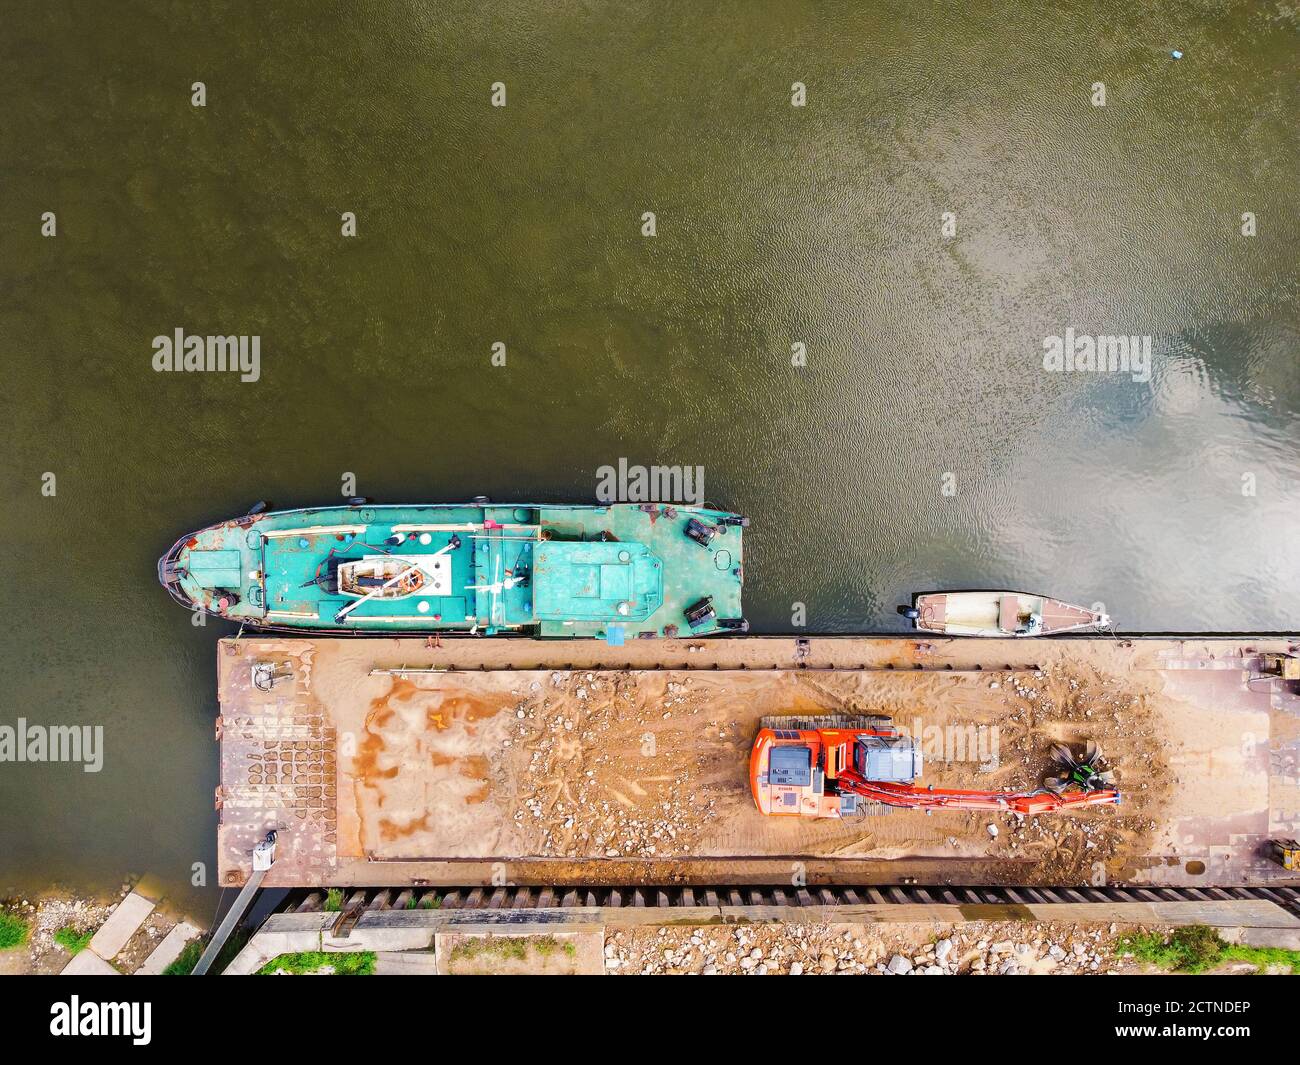 Old military boat stranded and left to rust on the bank of a river. Drone, aerial view Stock Photo